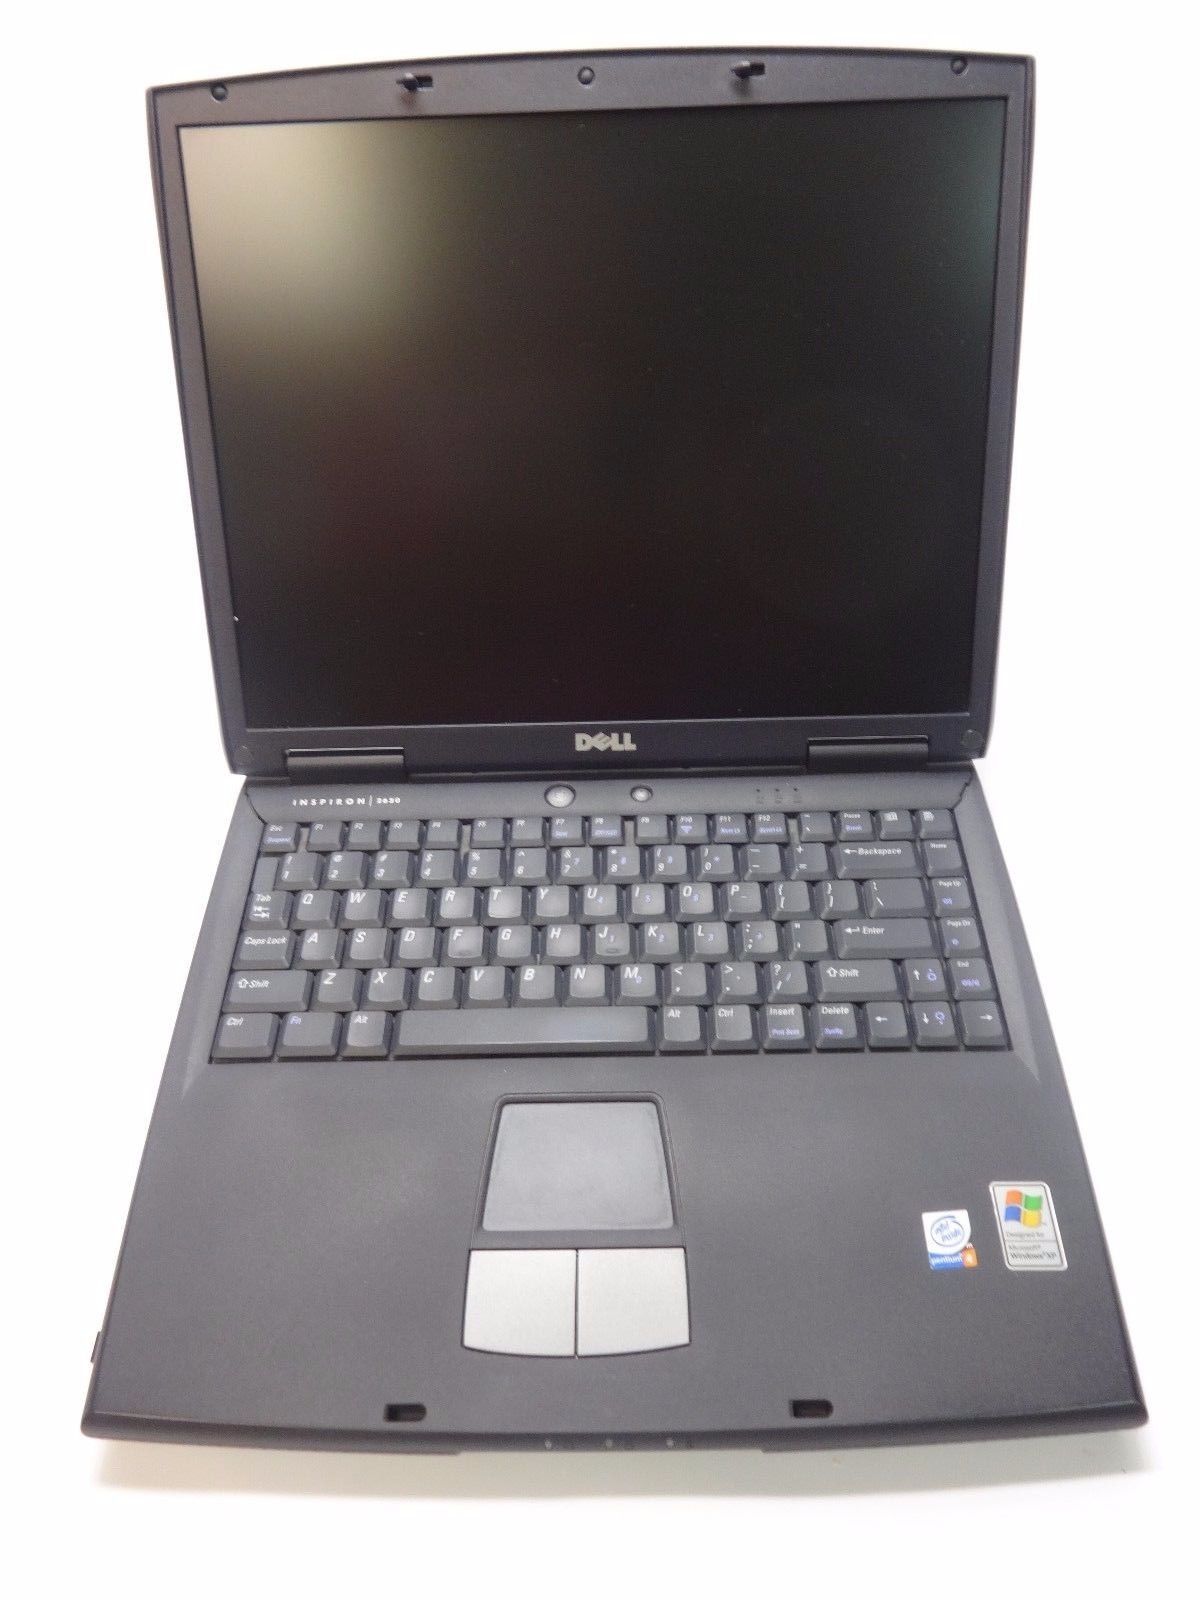 dell inspiron 2650 specifications